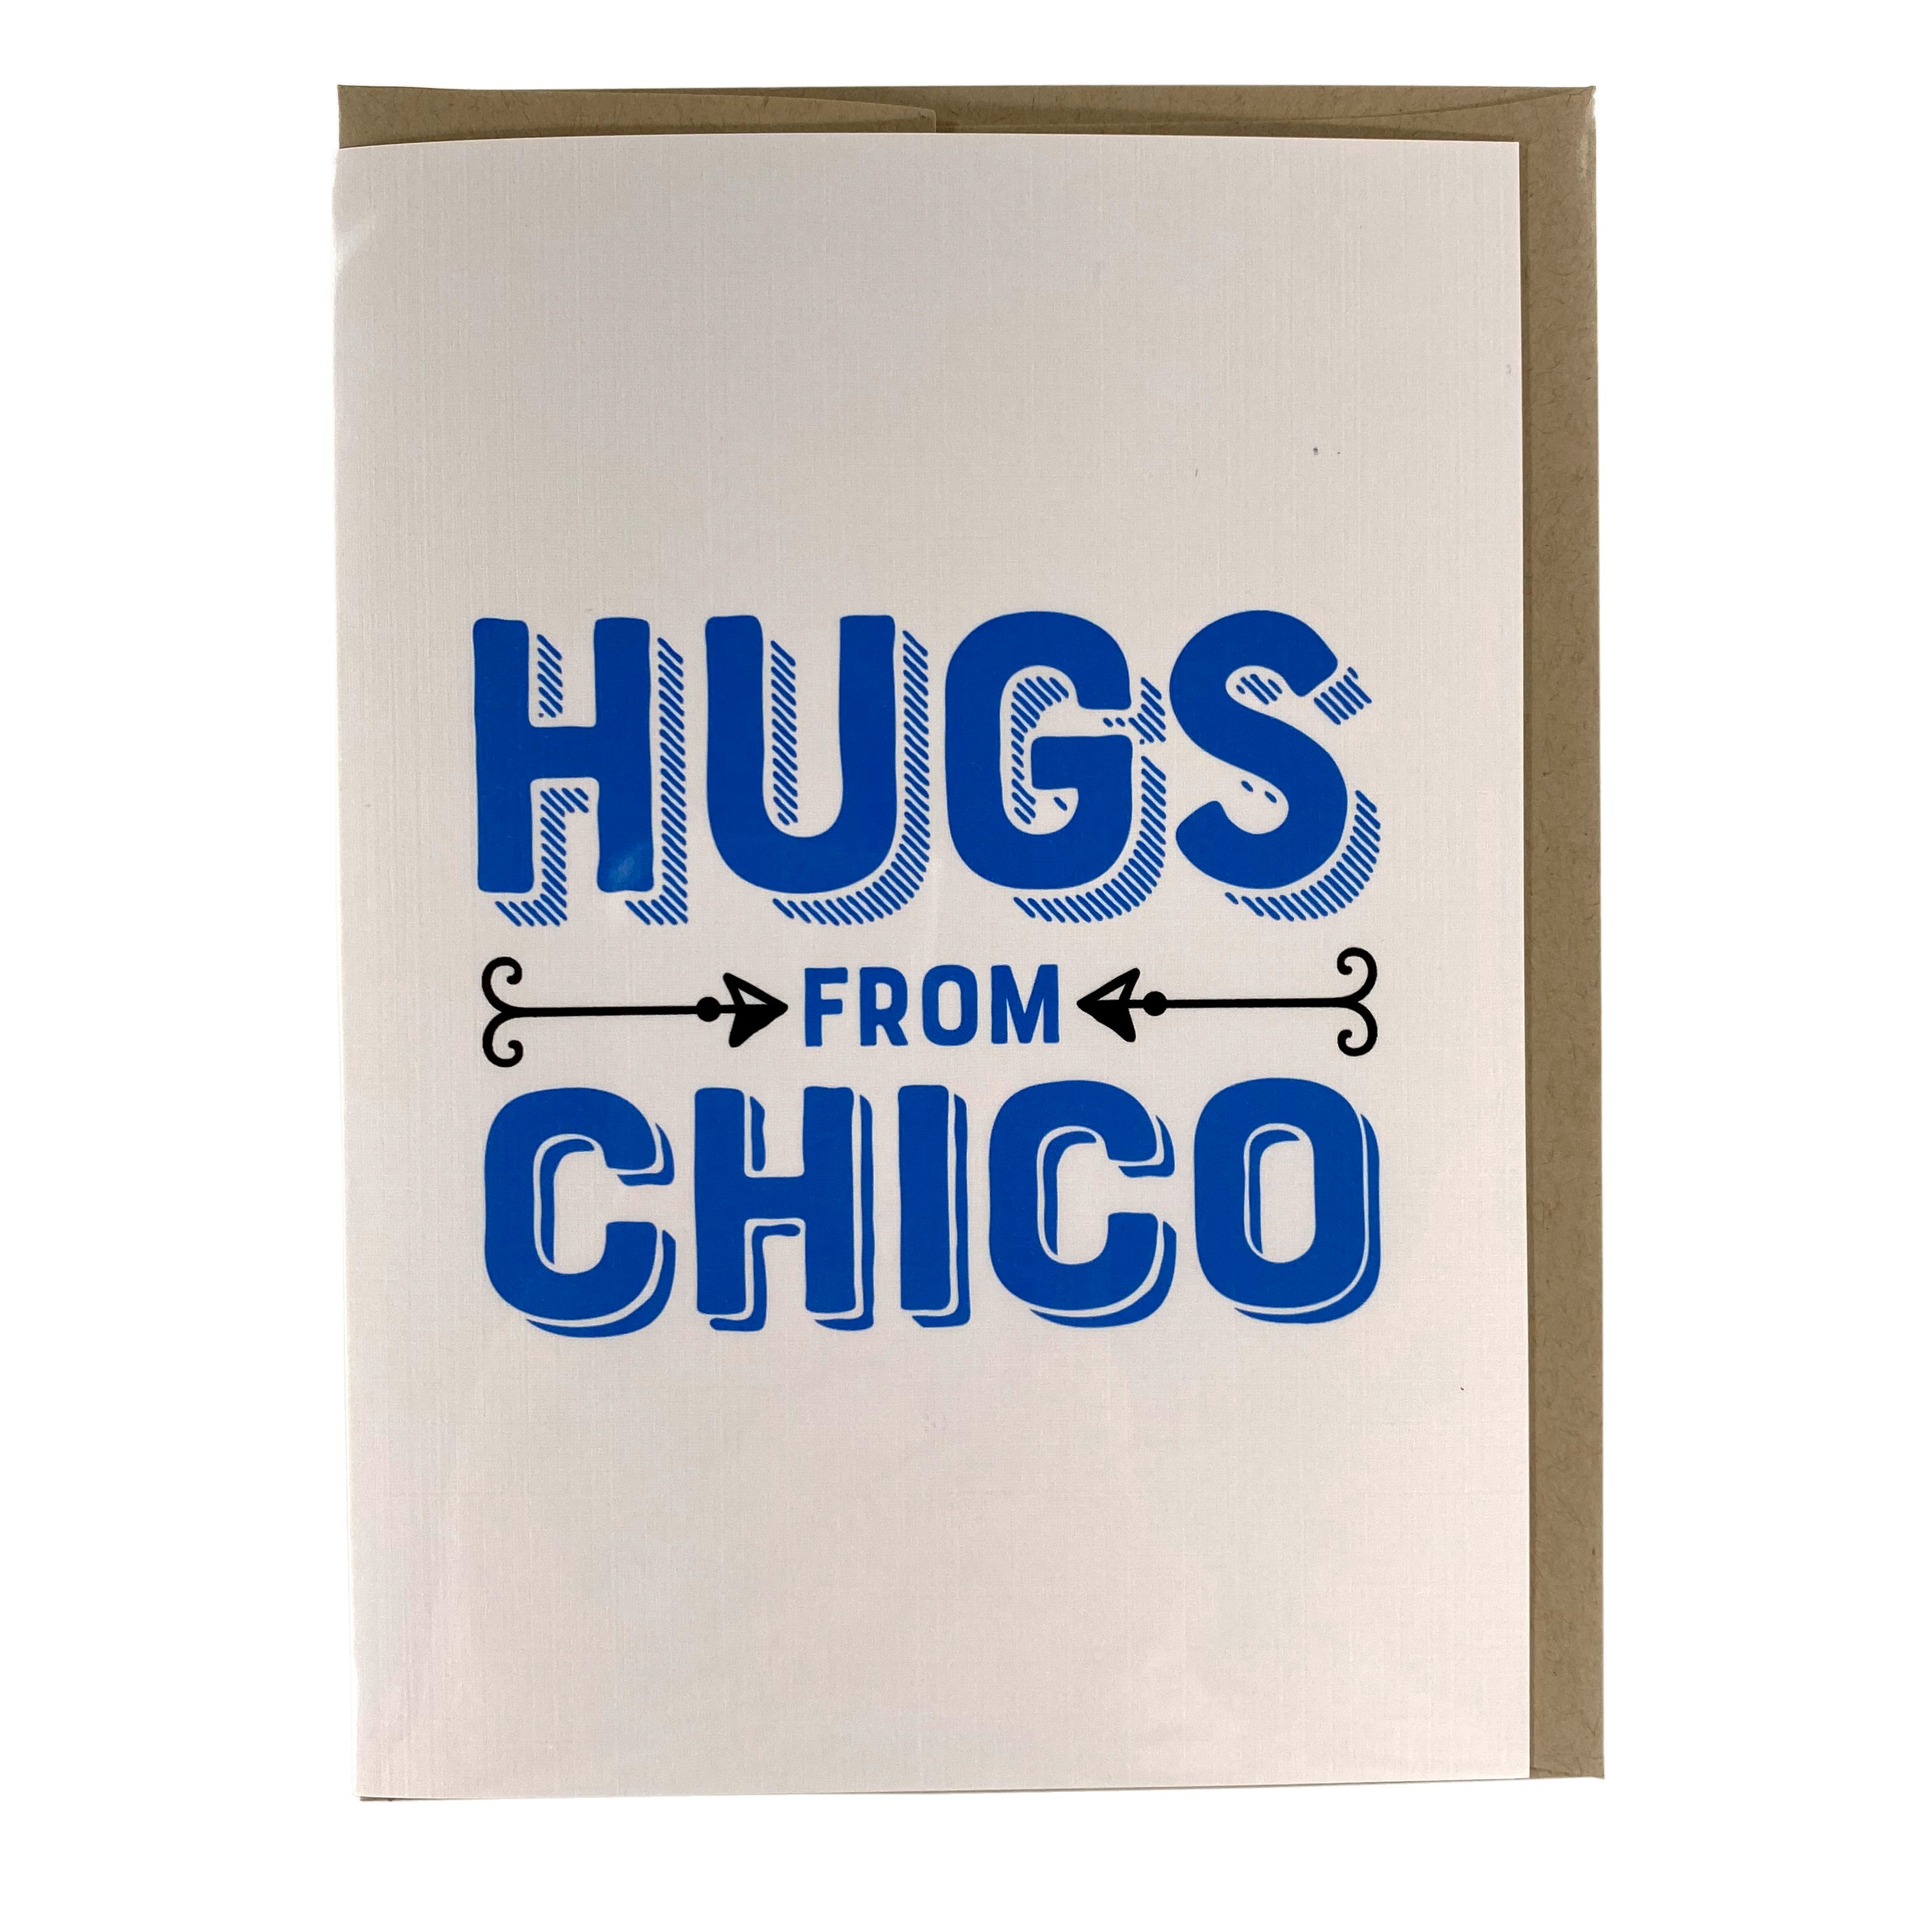 Hugs From Chico - Blank Greeting Card    